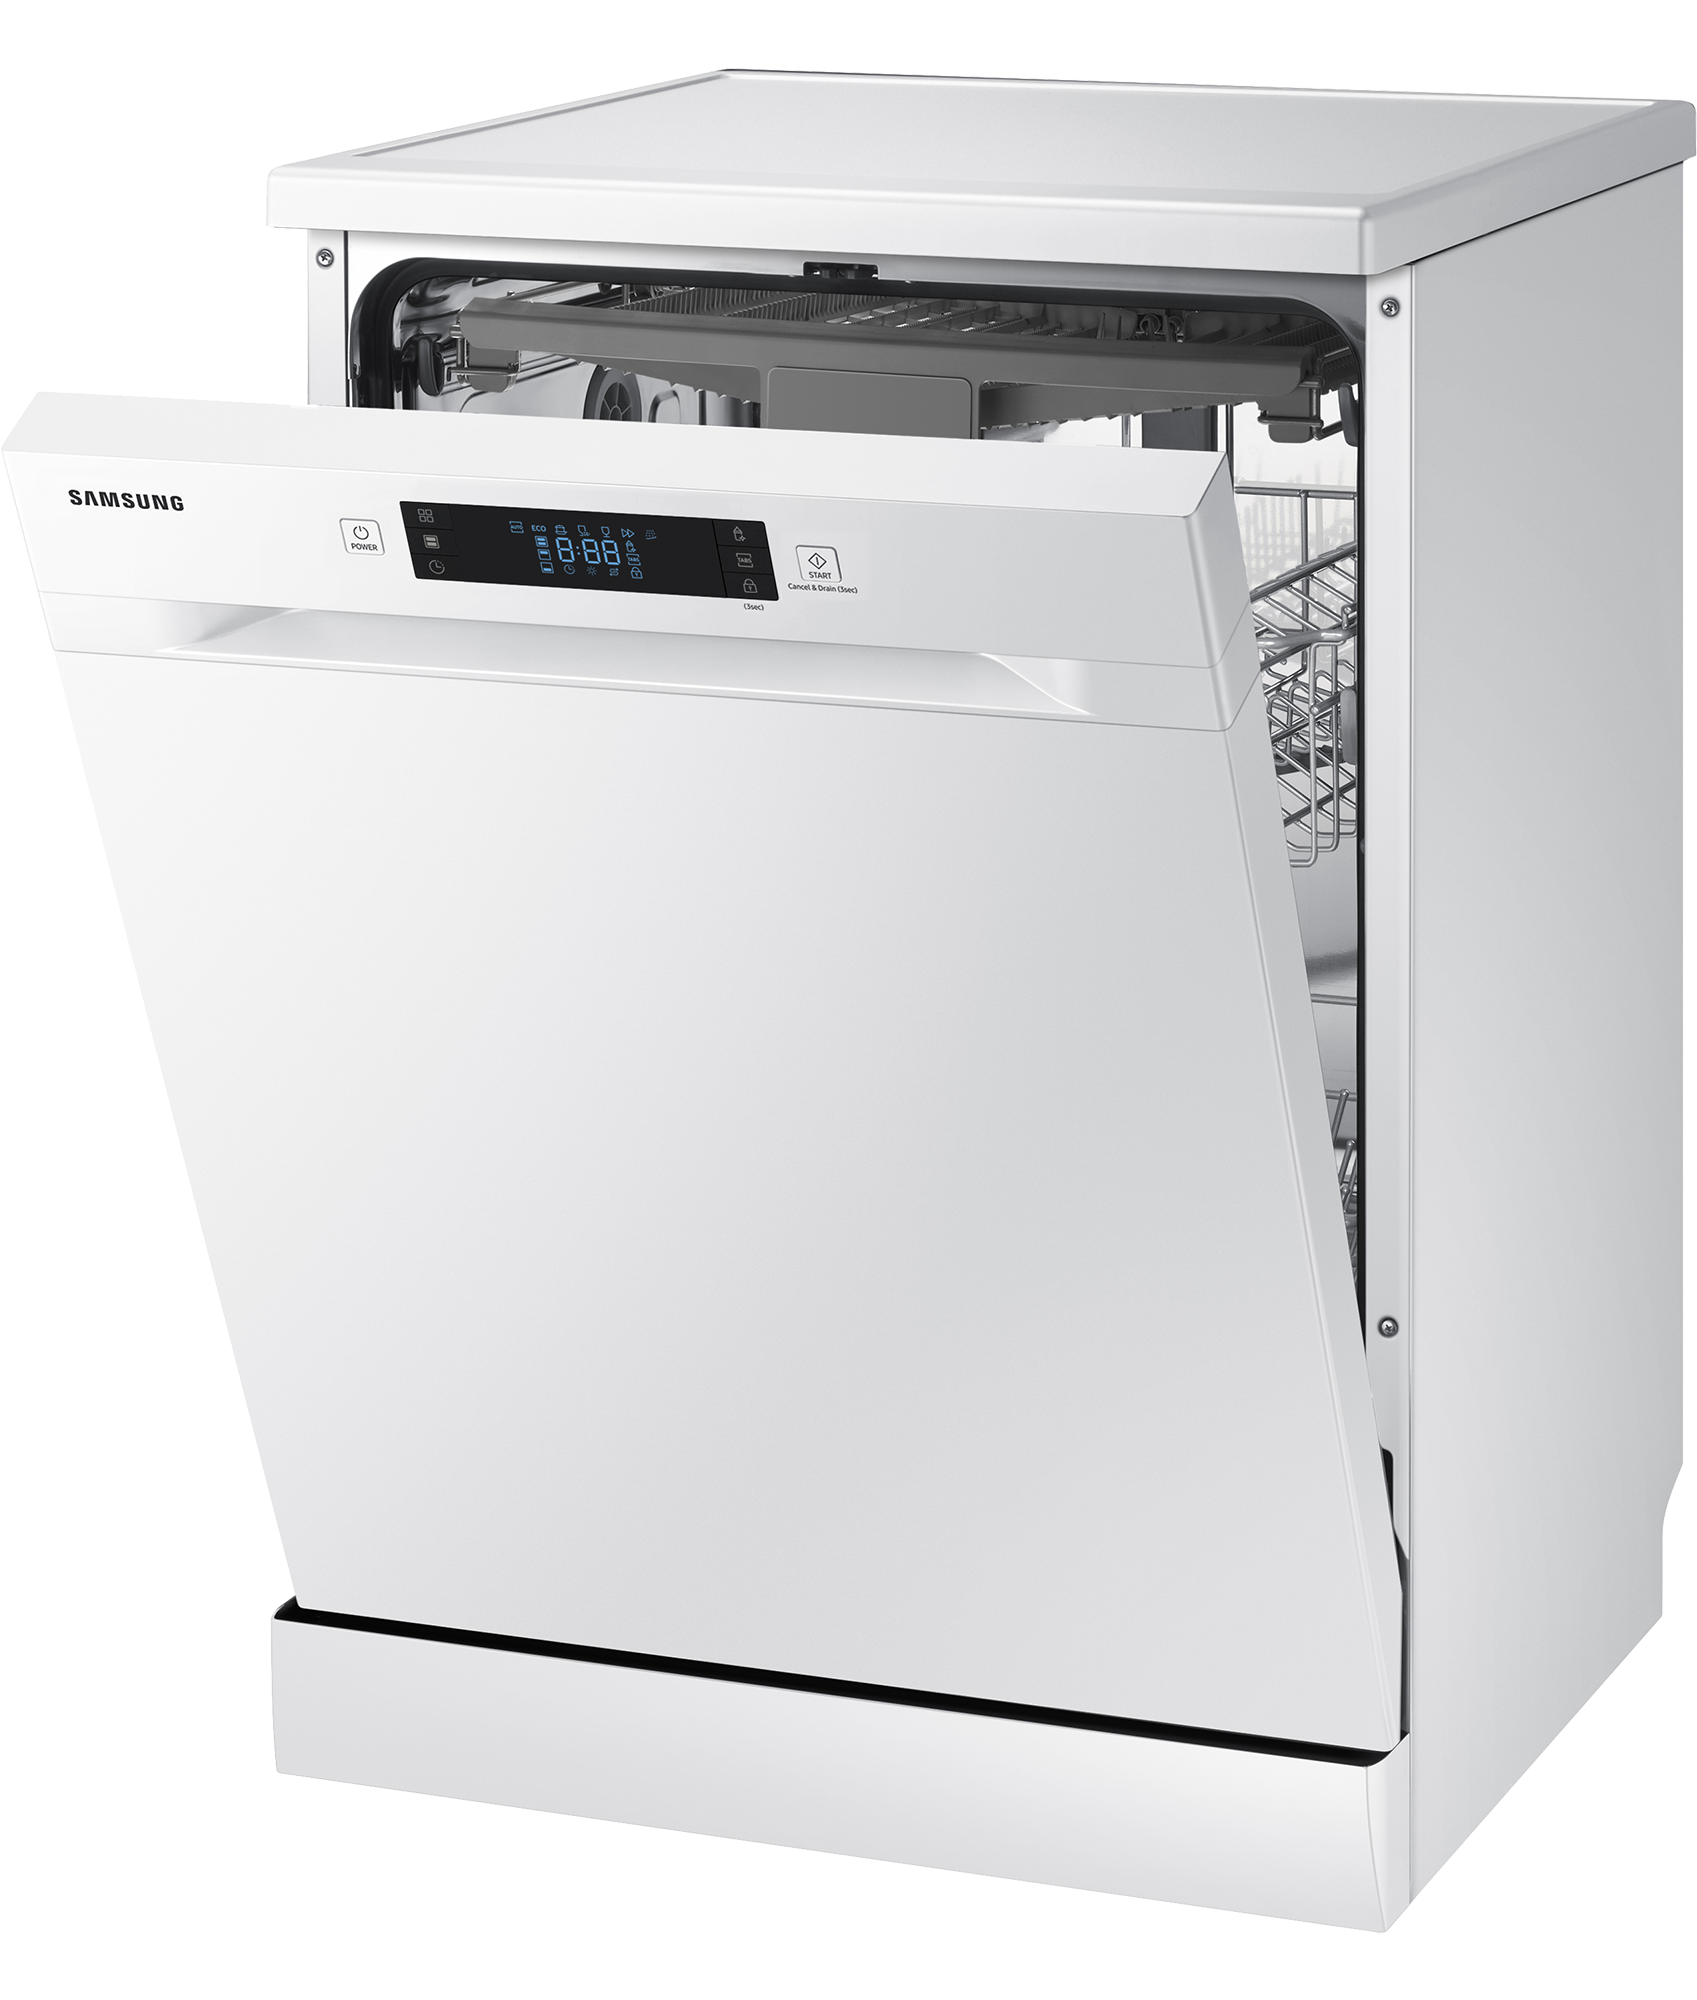 Freestanding Full Size Dishwasher with 14 Place Settings